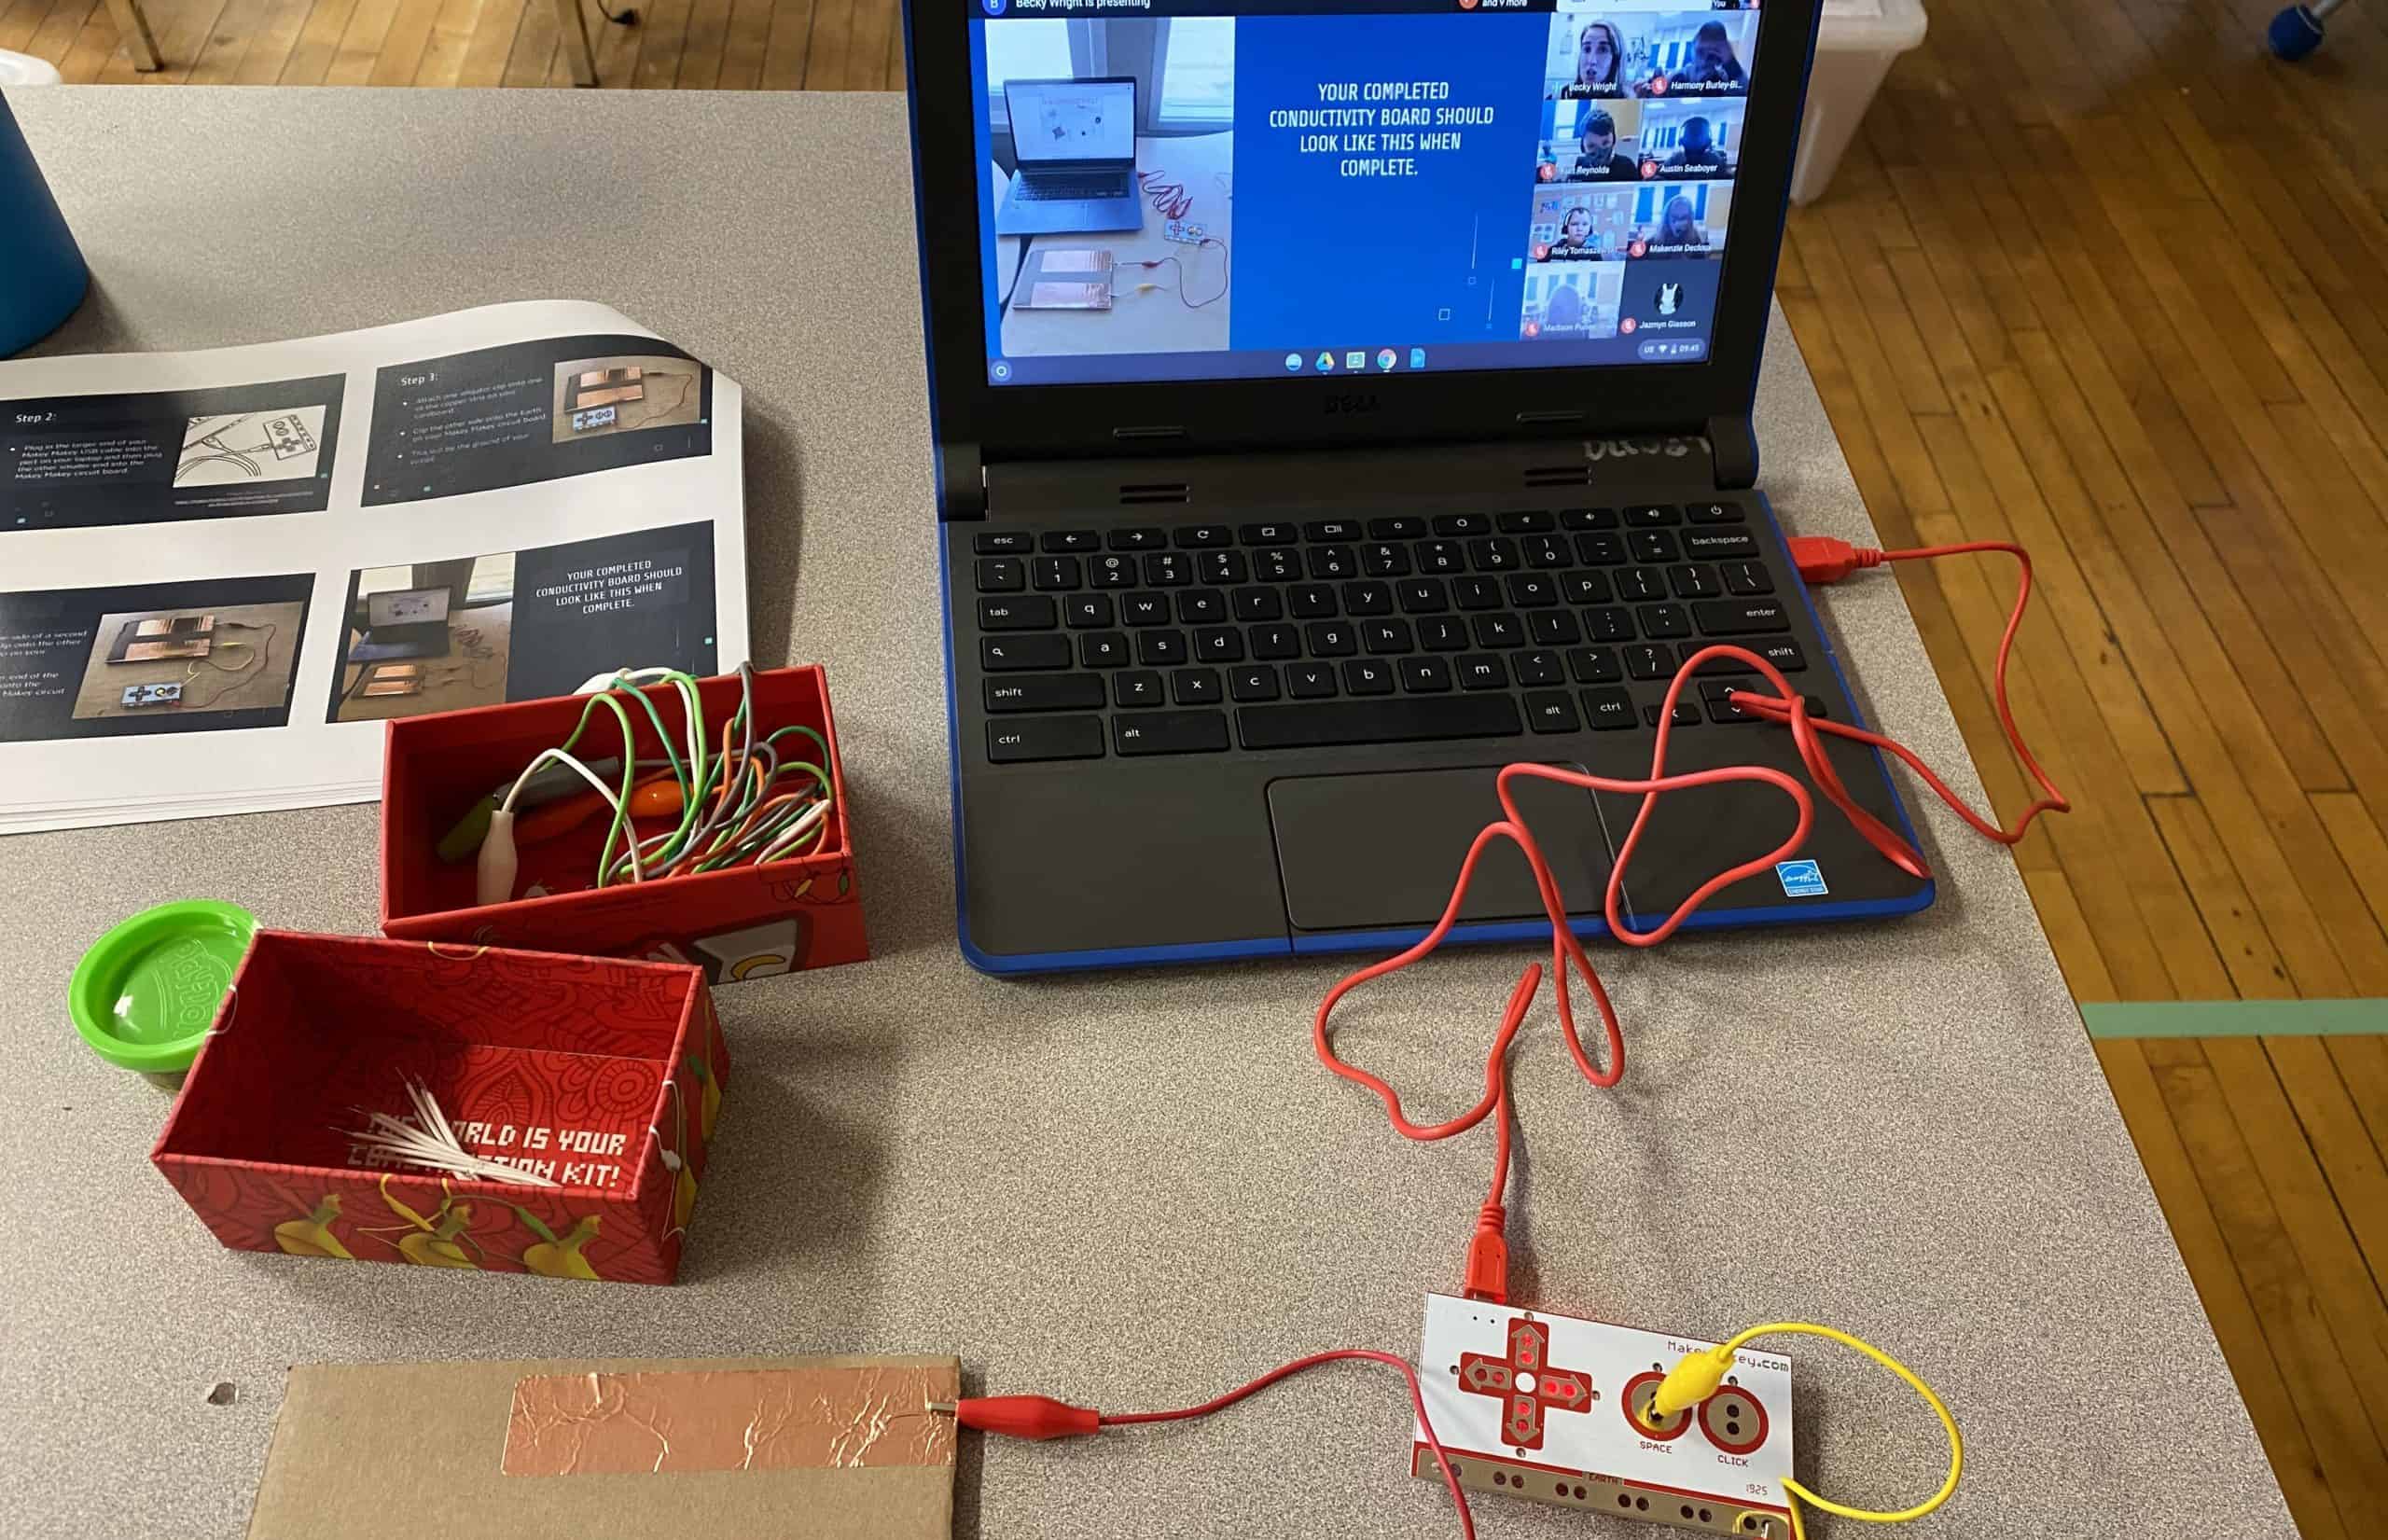 virtually teaching students to build circuits. Their computer is at the top of the screen and they have a makey makey attached to the computer.